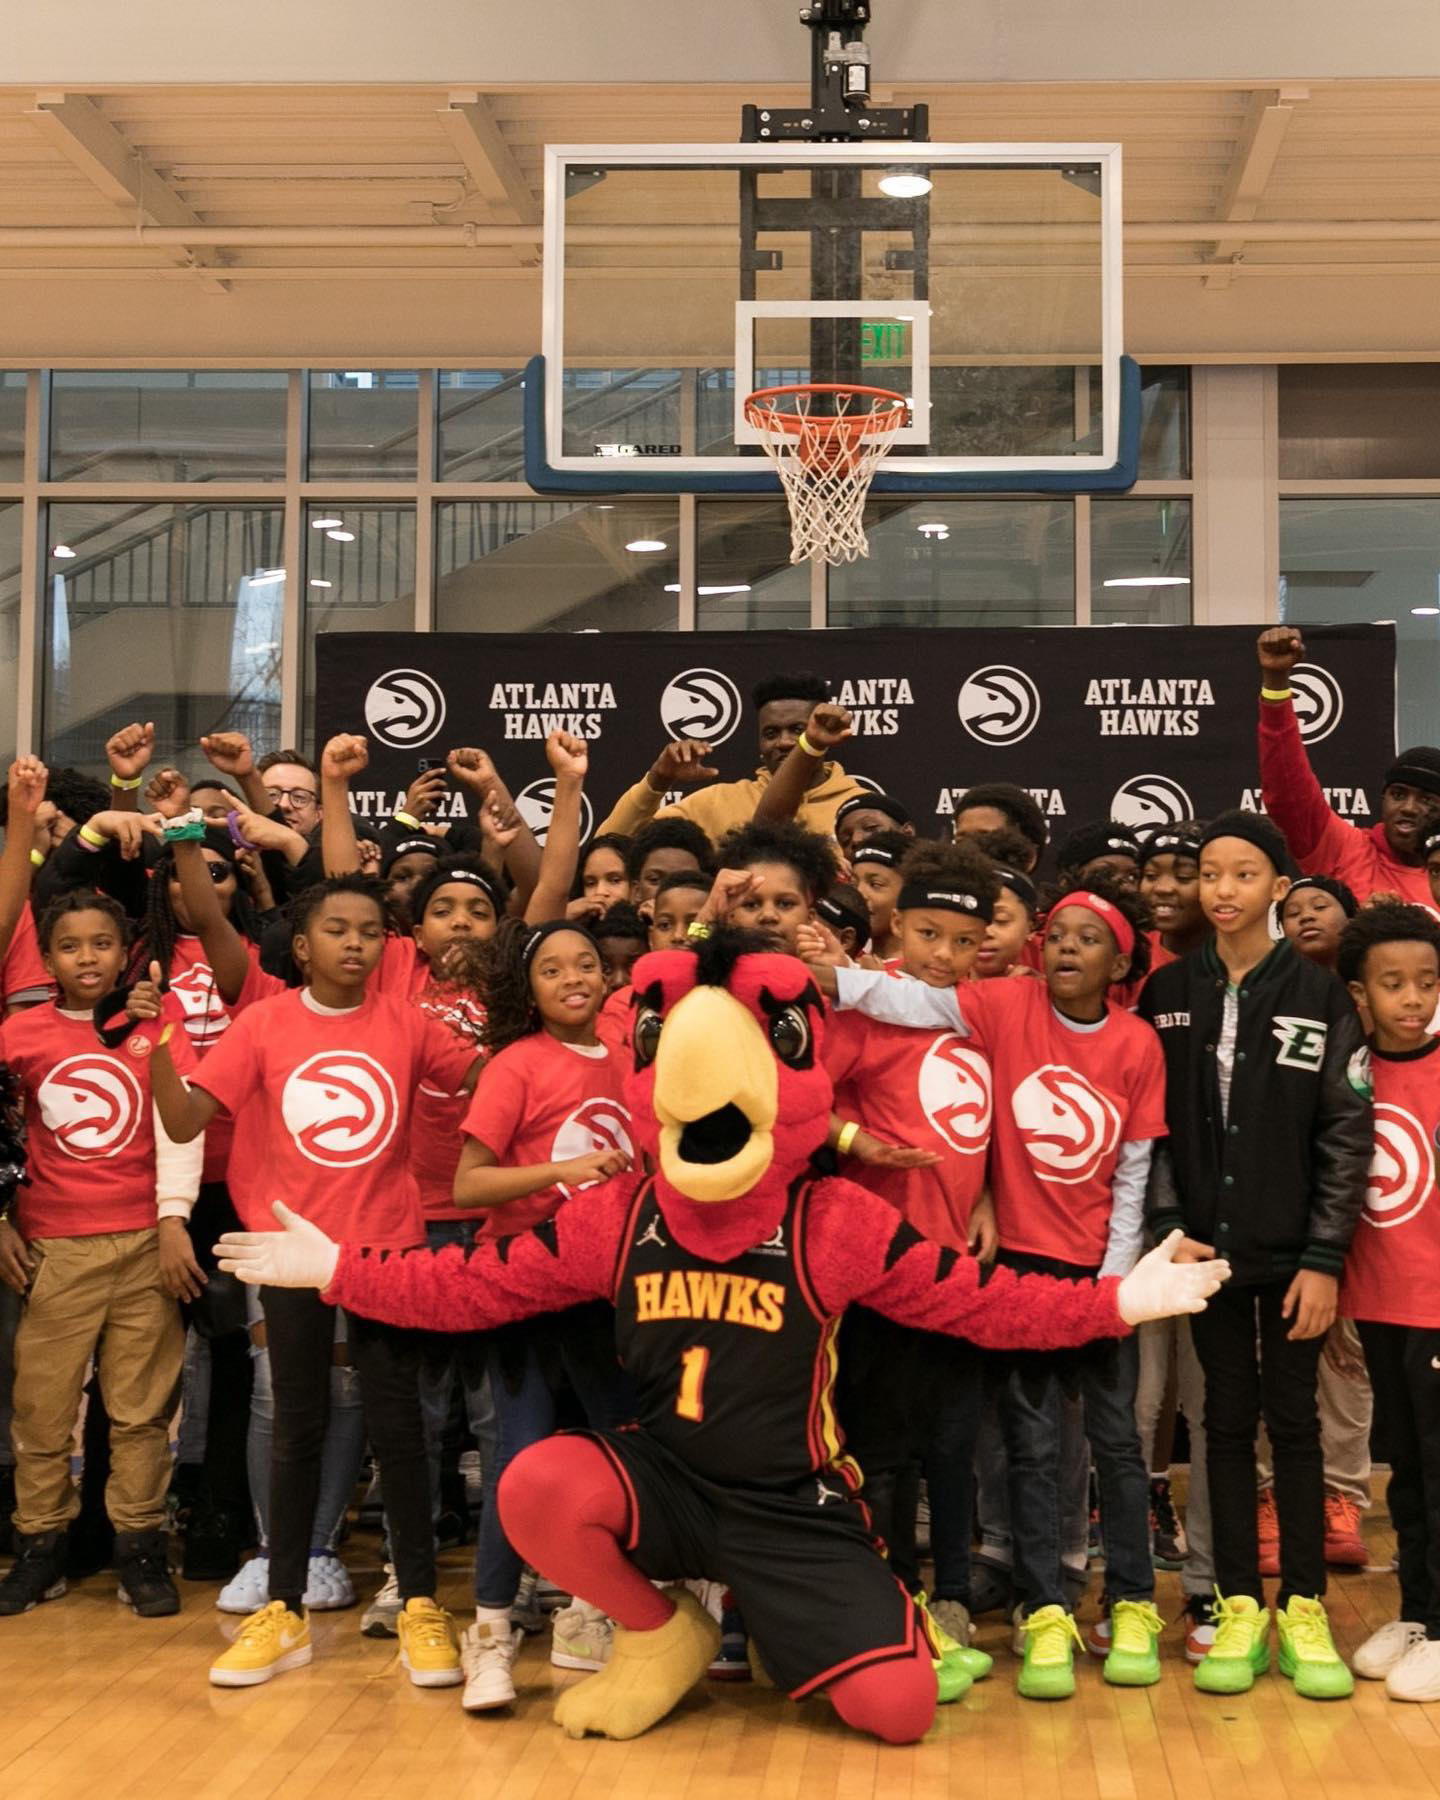 We partnered with the #atlhawks to teach kids how to create code to make Harry the Hawk dunk